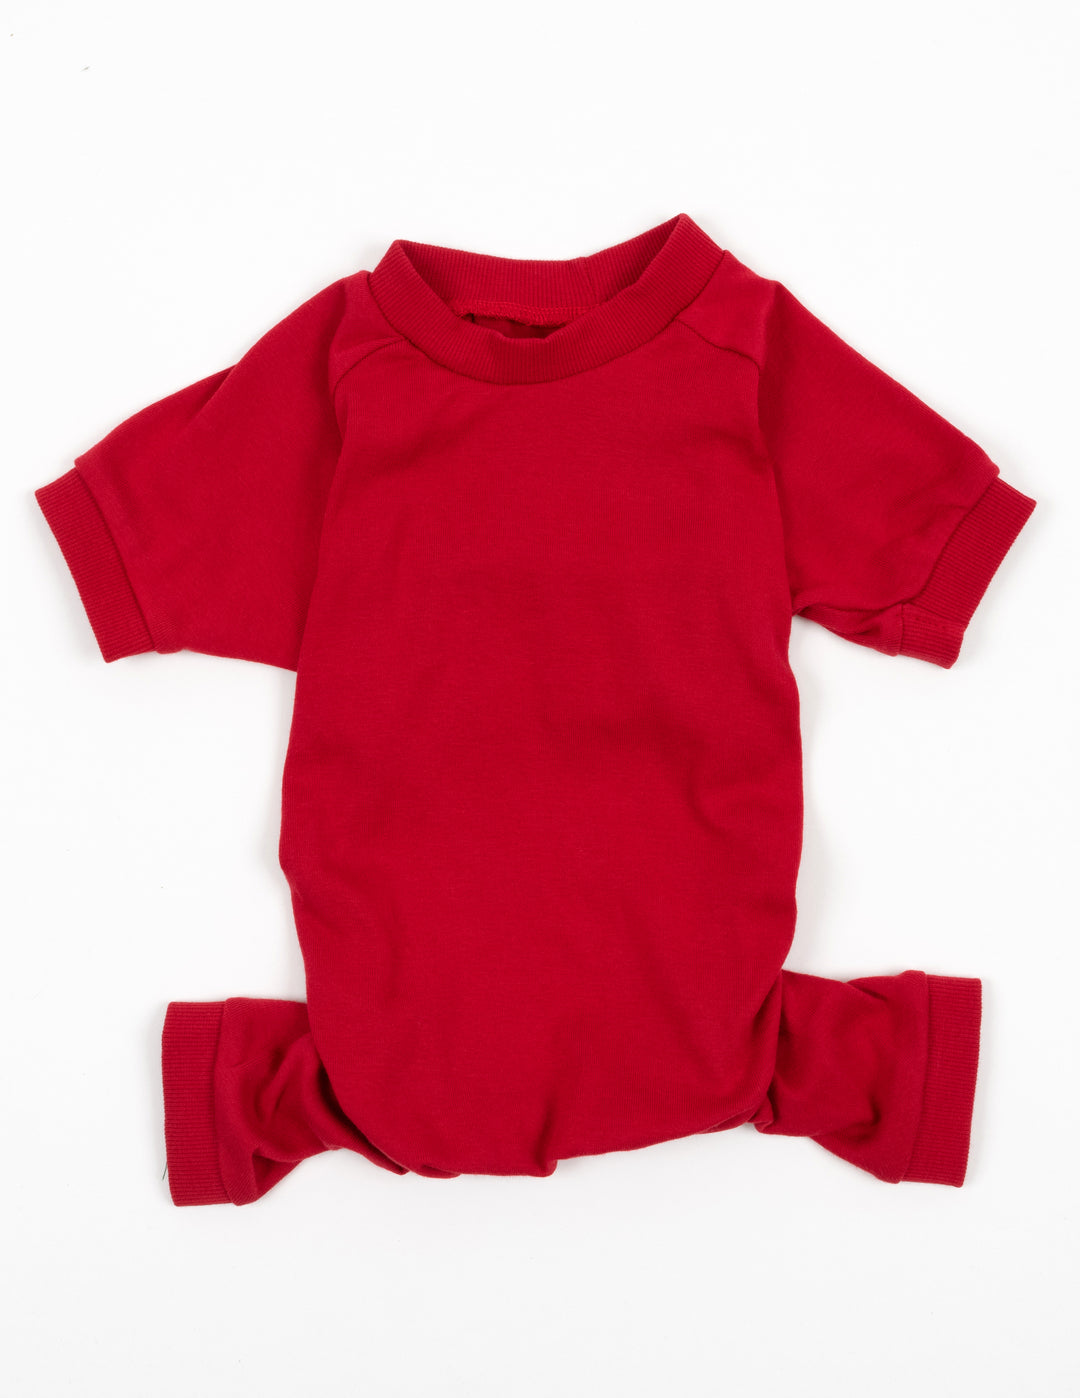 solid color red dog pajamas